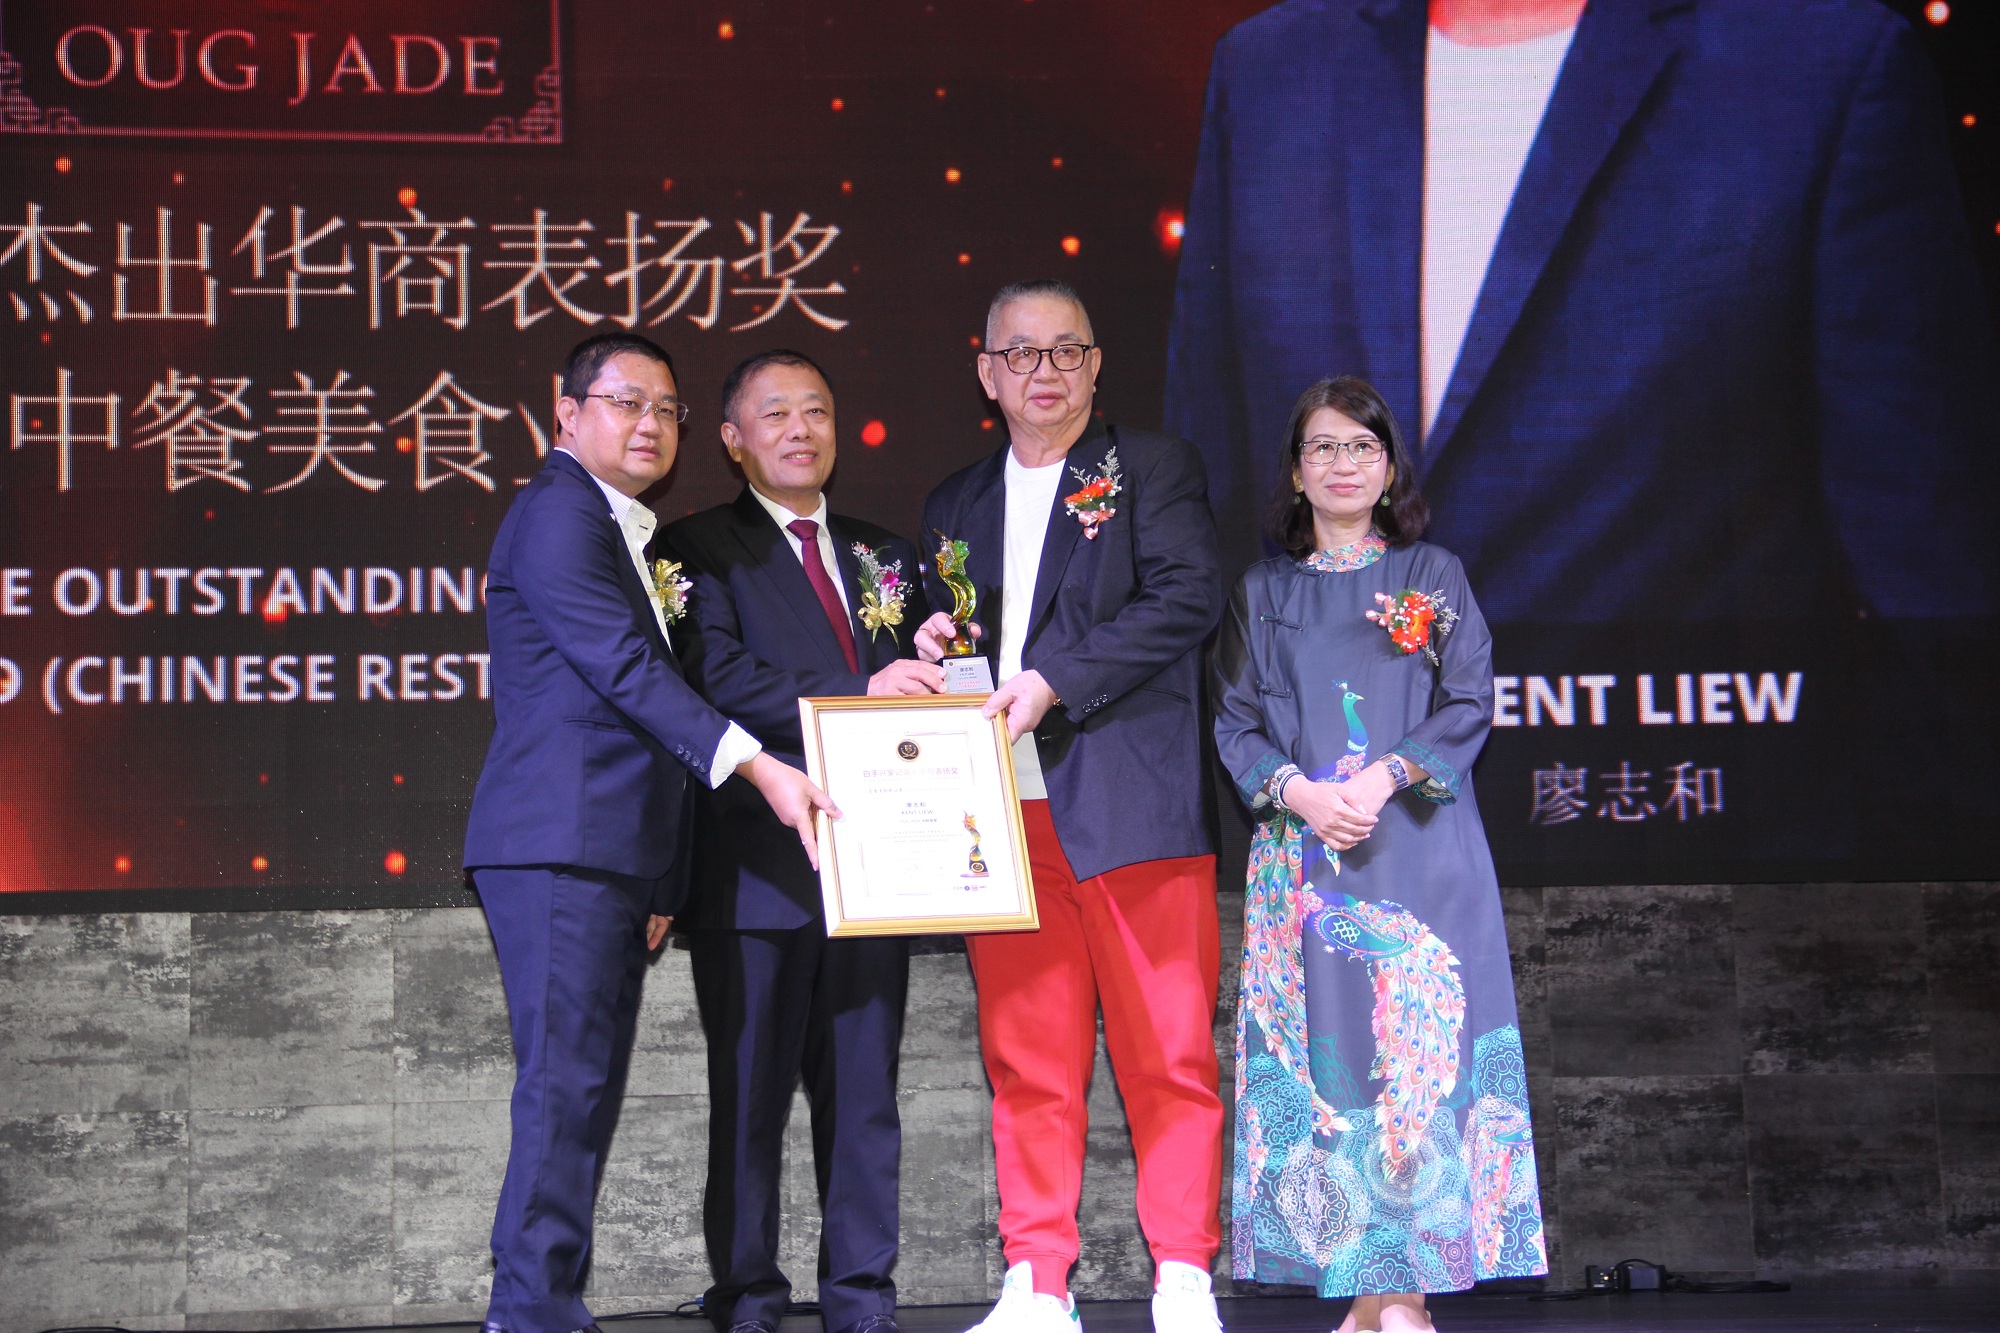 Liao Chi Wo received the ASEAN Outstanding Chinese Entrepreneur Award (Chinese Food and Gourmet Industry).